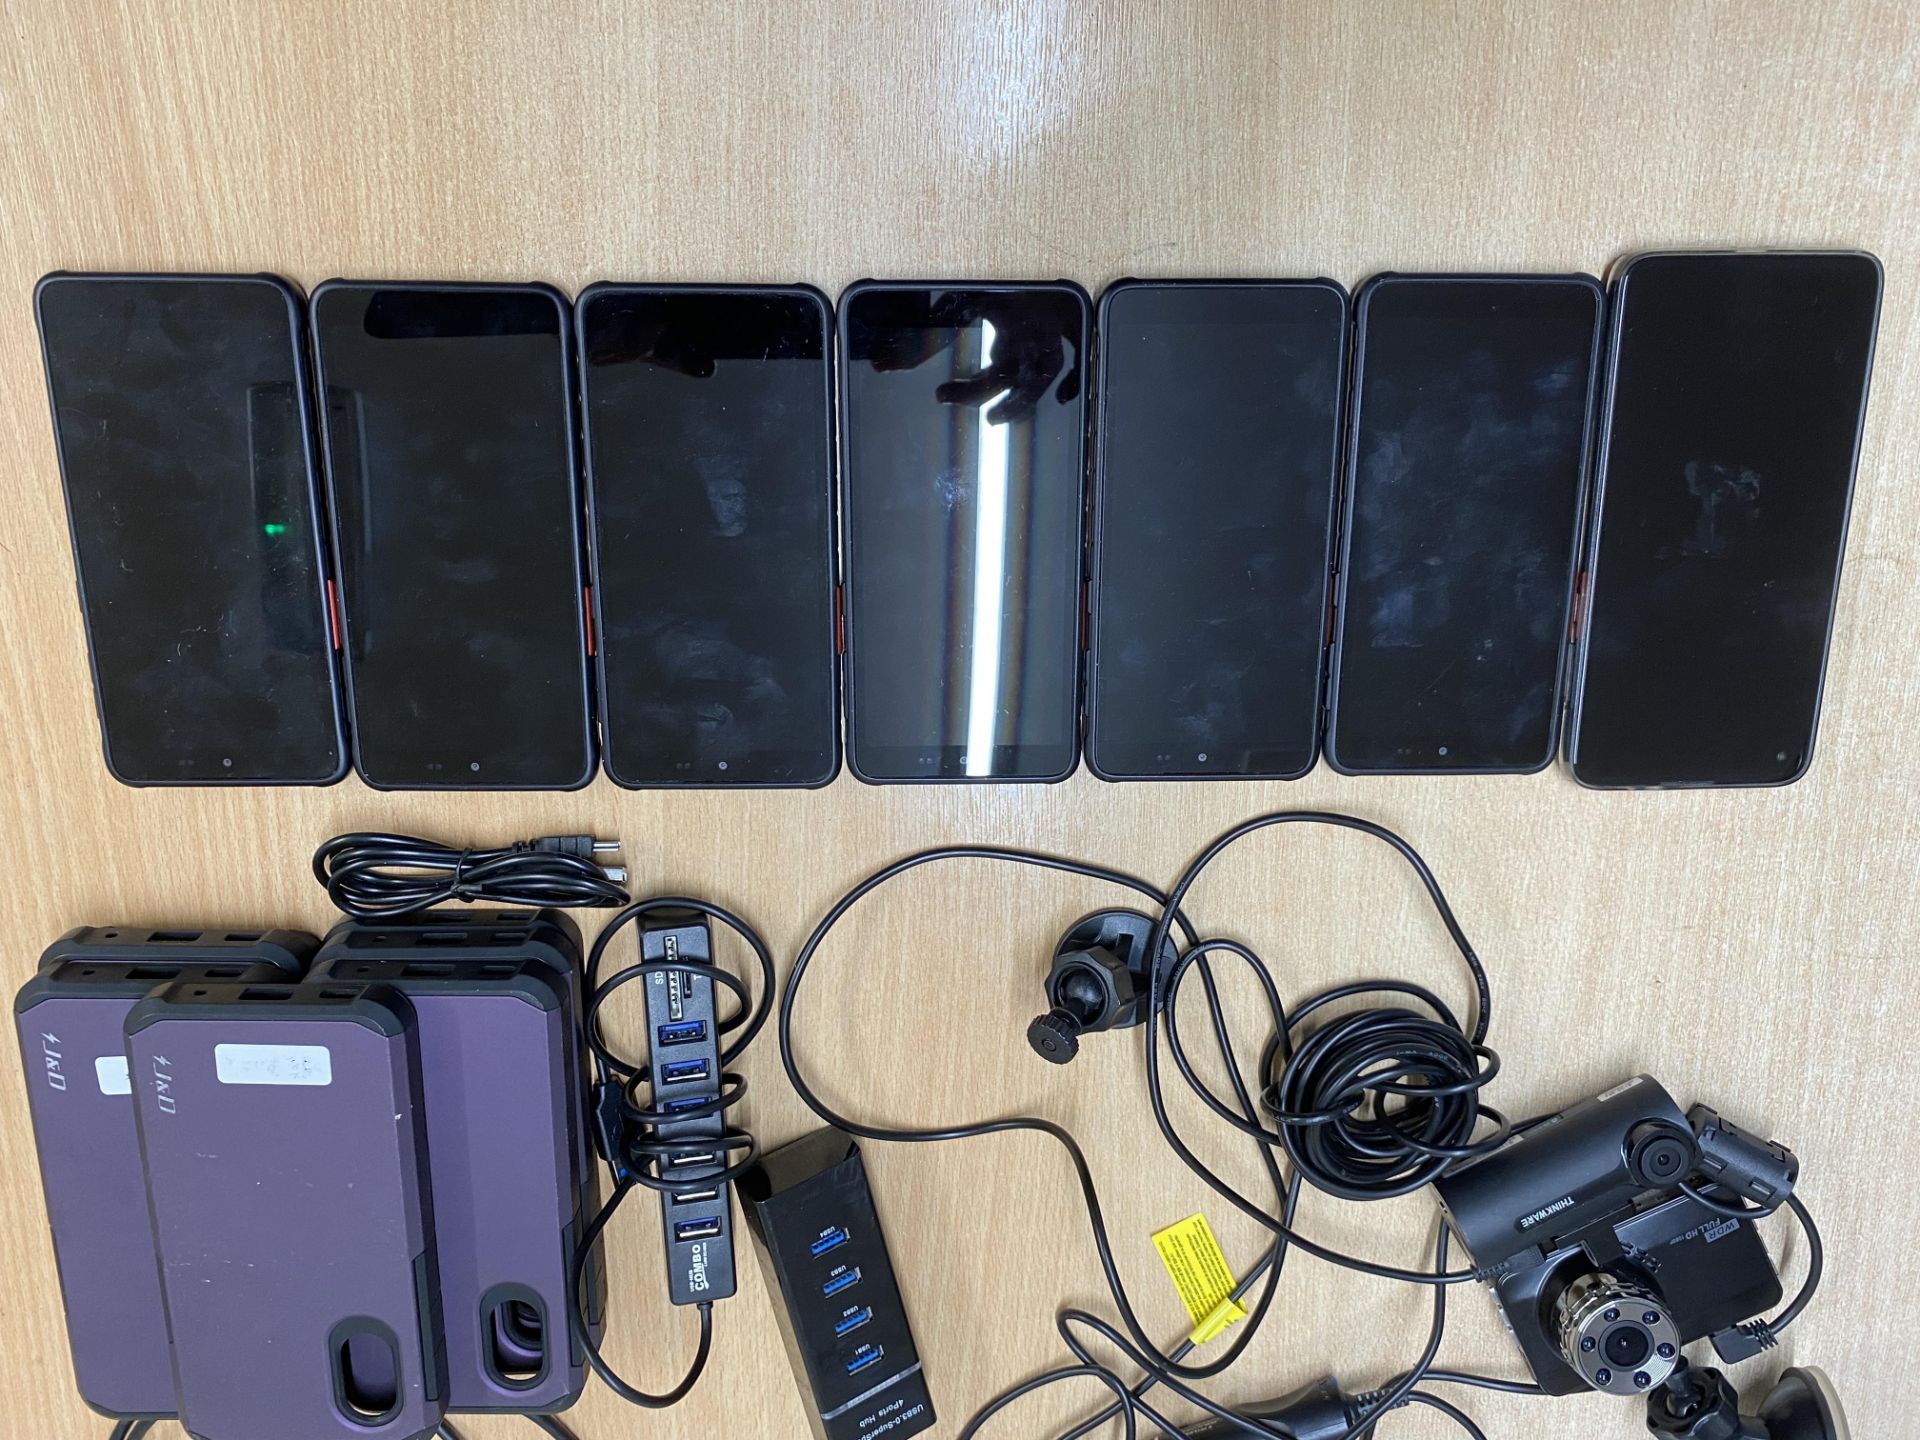 6x Samsung and 1x Motorola Mobile Phones, J&D Phone Cases, 2x Dashcams & 2x USB Charger Bars - Image 3 of 4